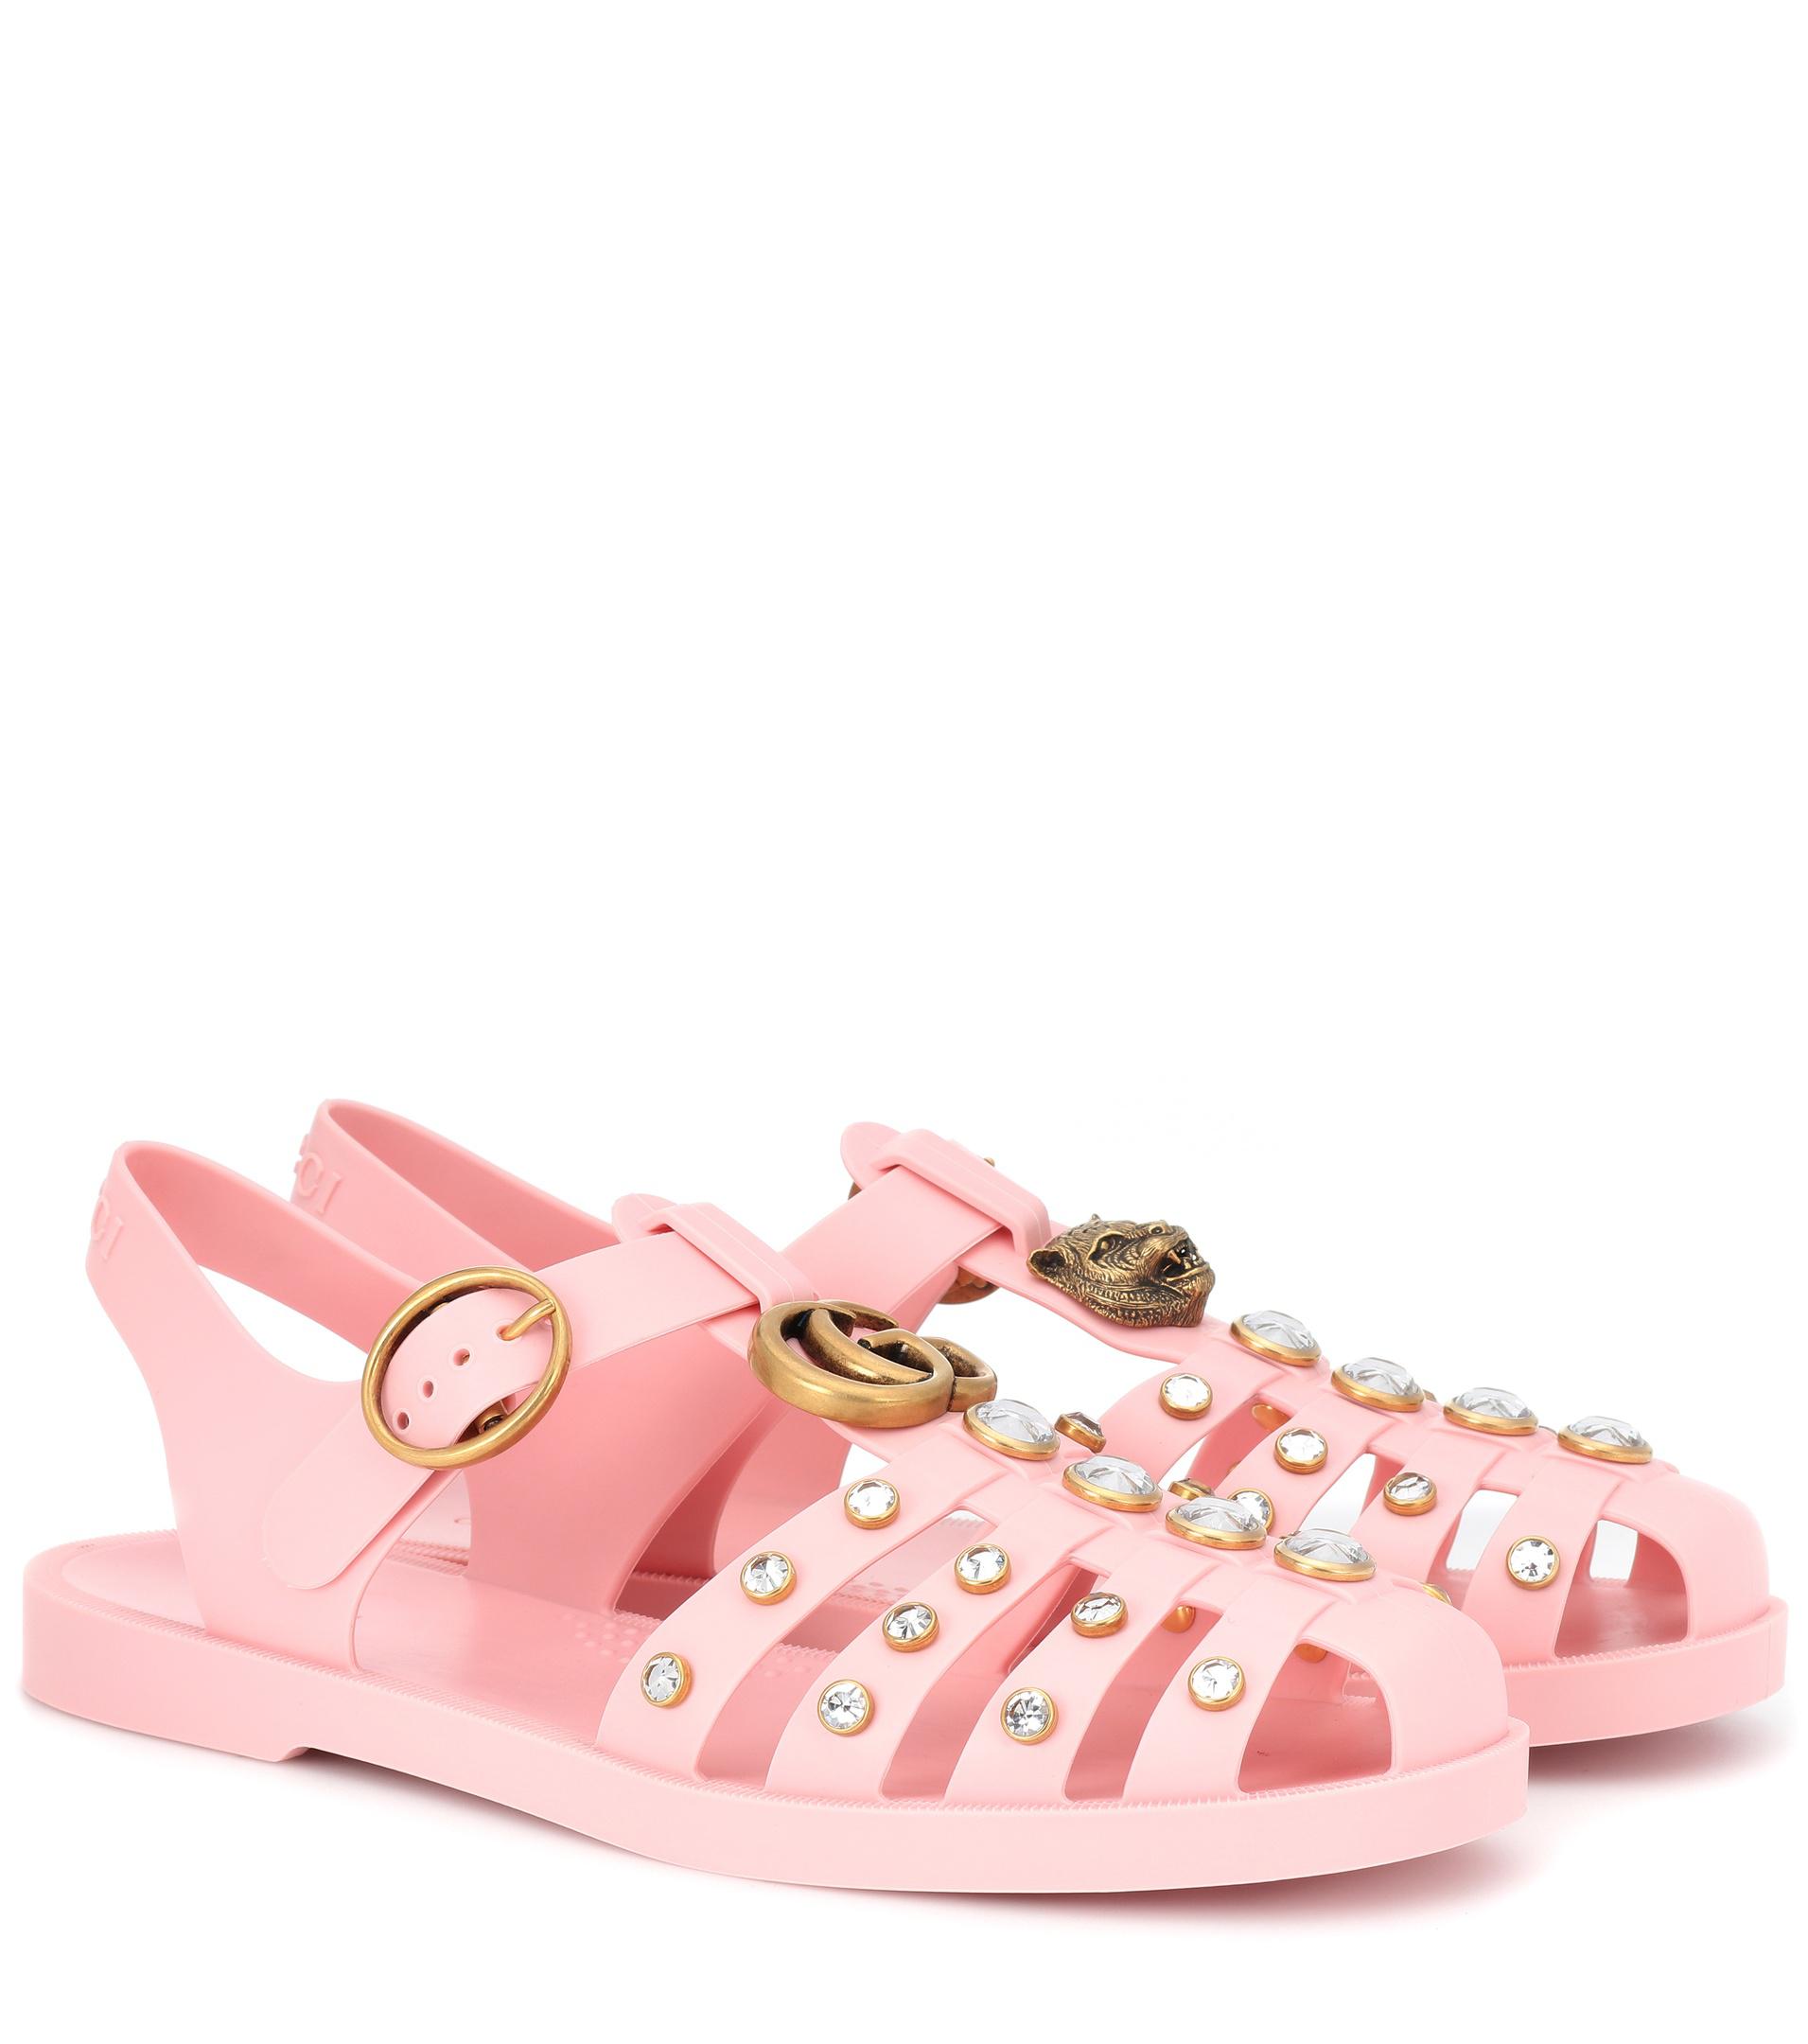 yg gucci jelly sandals